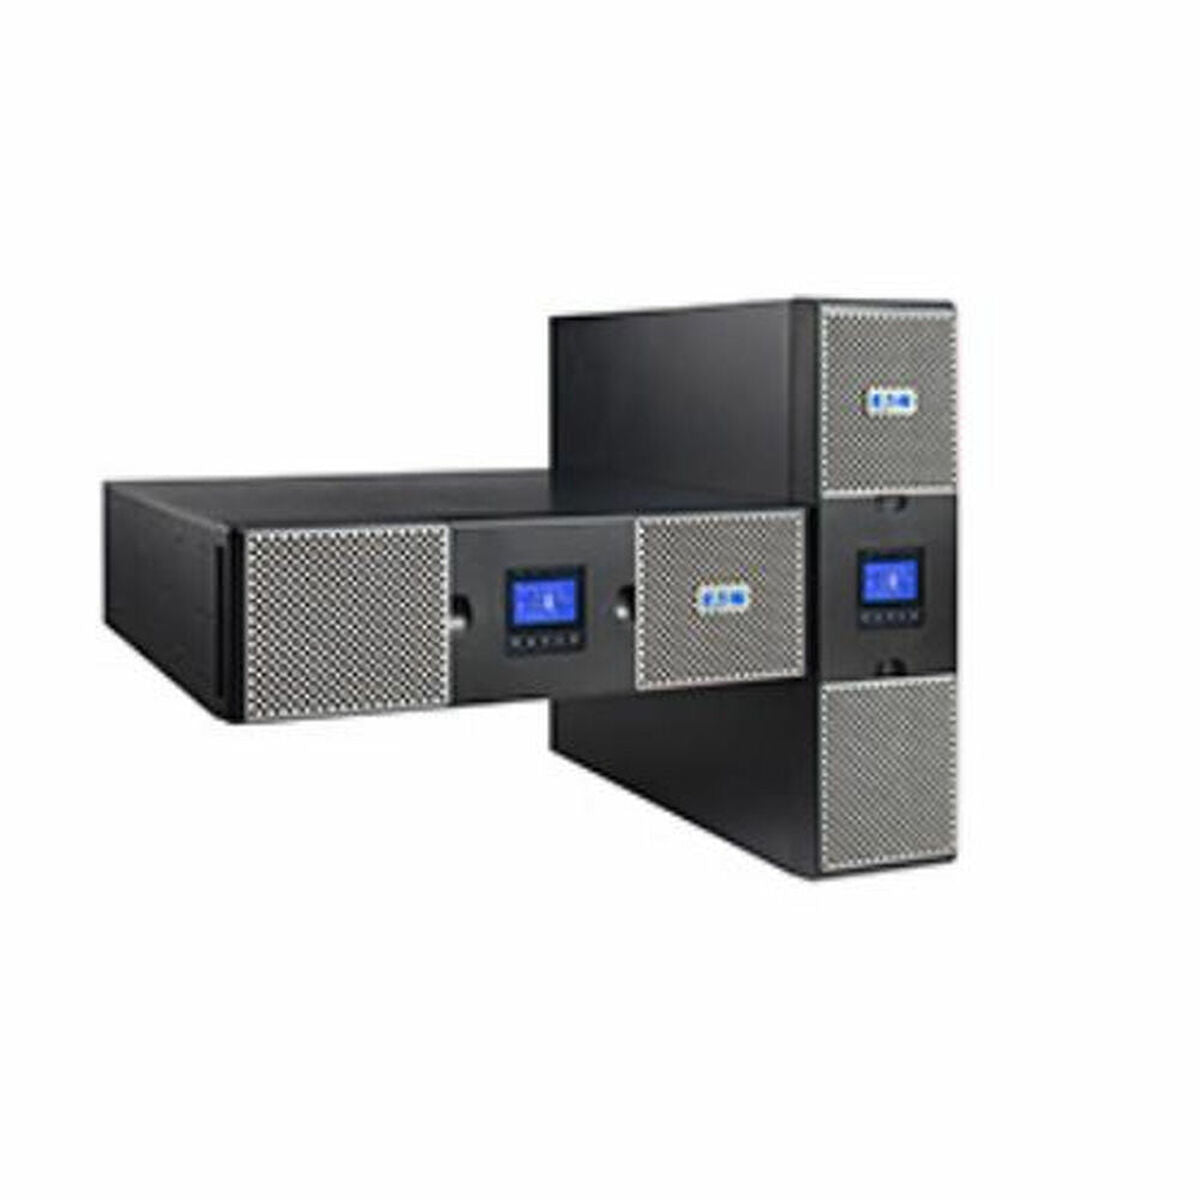 Uninterruptible Power Supply System Interactive UPS Eaton 9PX2200IRTN, Eaton, Computing, Accessories, uninterruptible-power-supply-system-interactive-ups-eaton-9px2200irtn, Brand_Eaton, category-reference-2609, category-reference-2642, category-reference-2845, category-reference-t-19685, category-reference-t-19908, category-reference-t-21341, computers / peripherals, Condition_NEW, office, Price_+ 1000, Teleworking, RiotNook